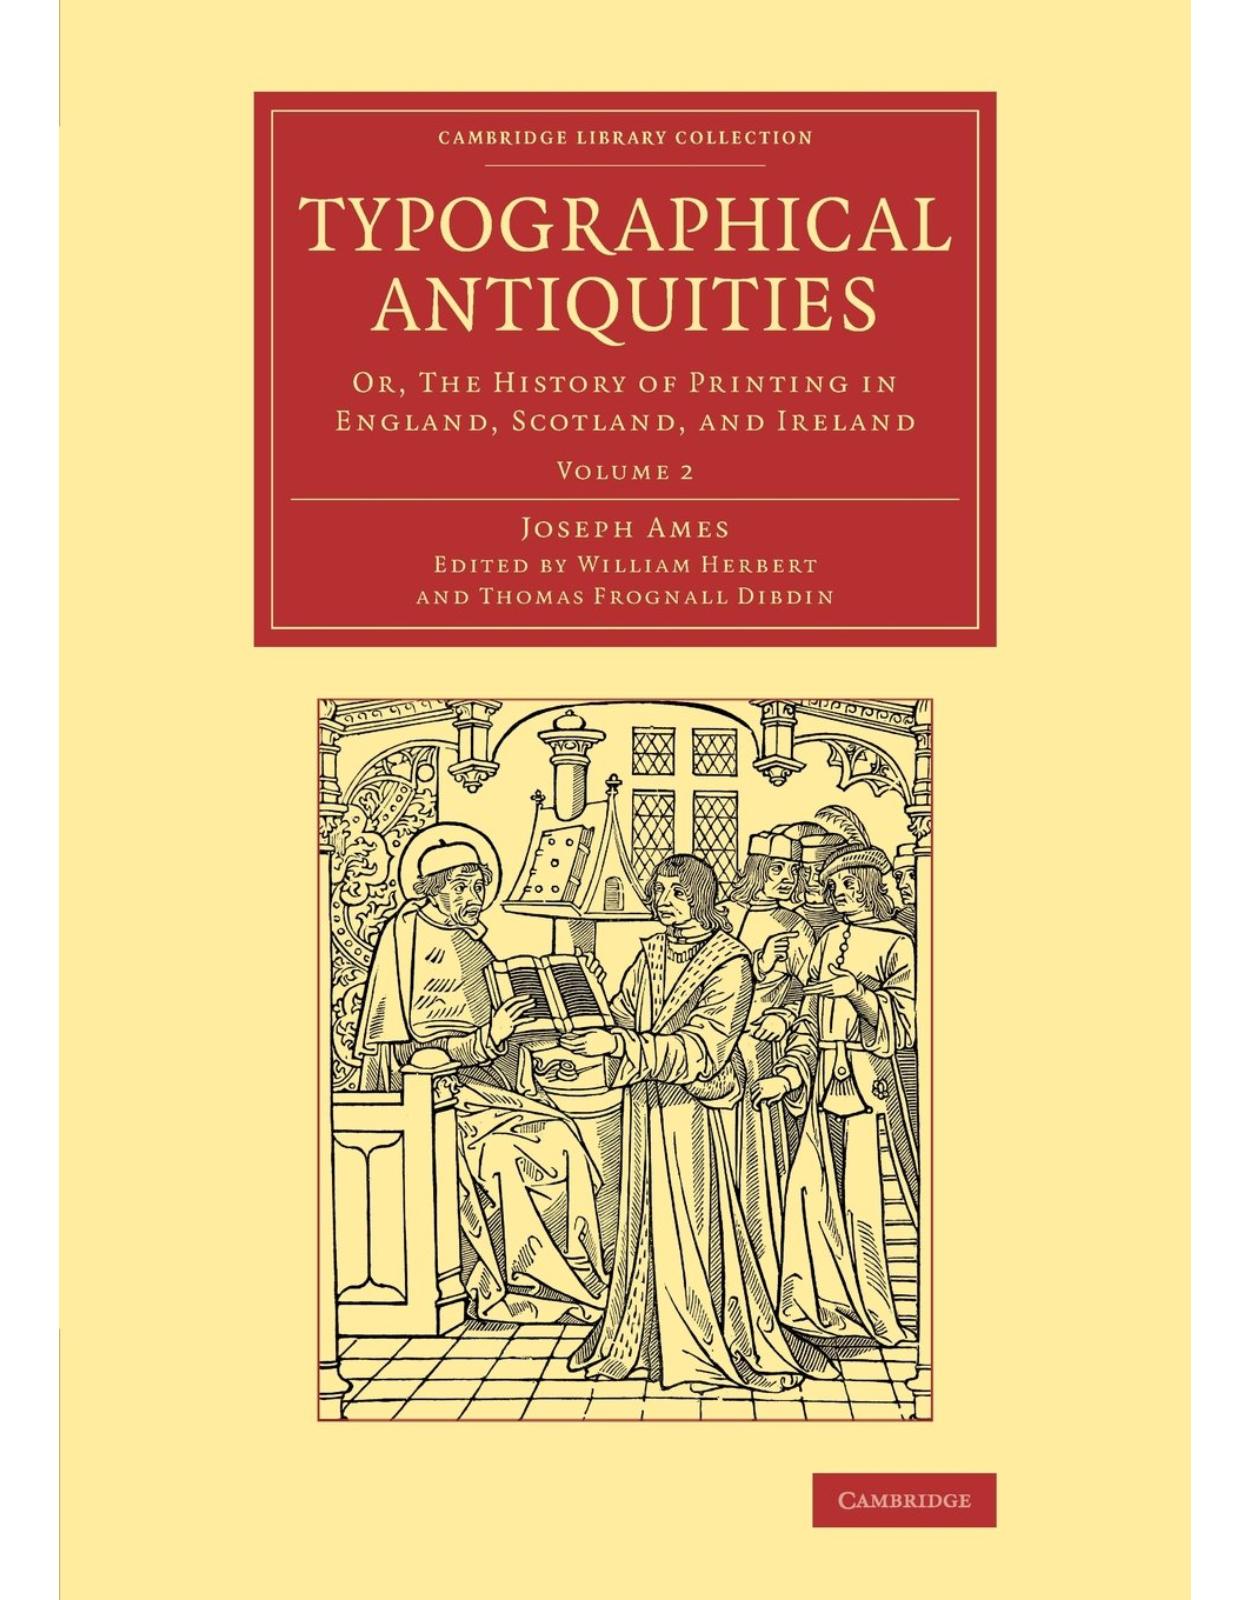 Typographical Antiquities 4 Volume Set: Typographical Antiquities: Or, The History of Printing in England, Scotland, and Ireland: Volume 2 (Cambridge ... of Printing, Publishing and Libraries)